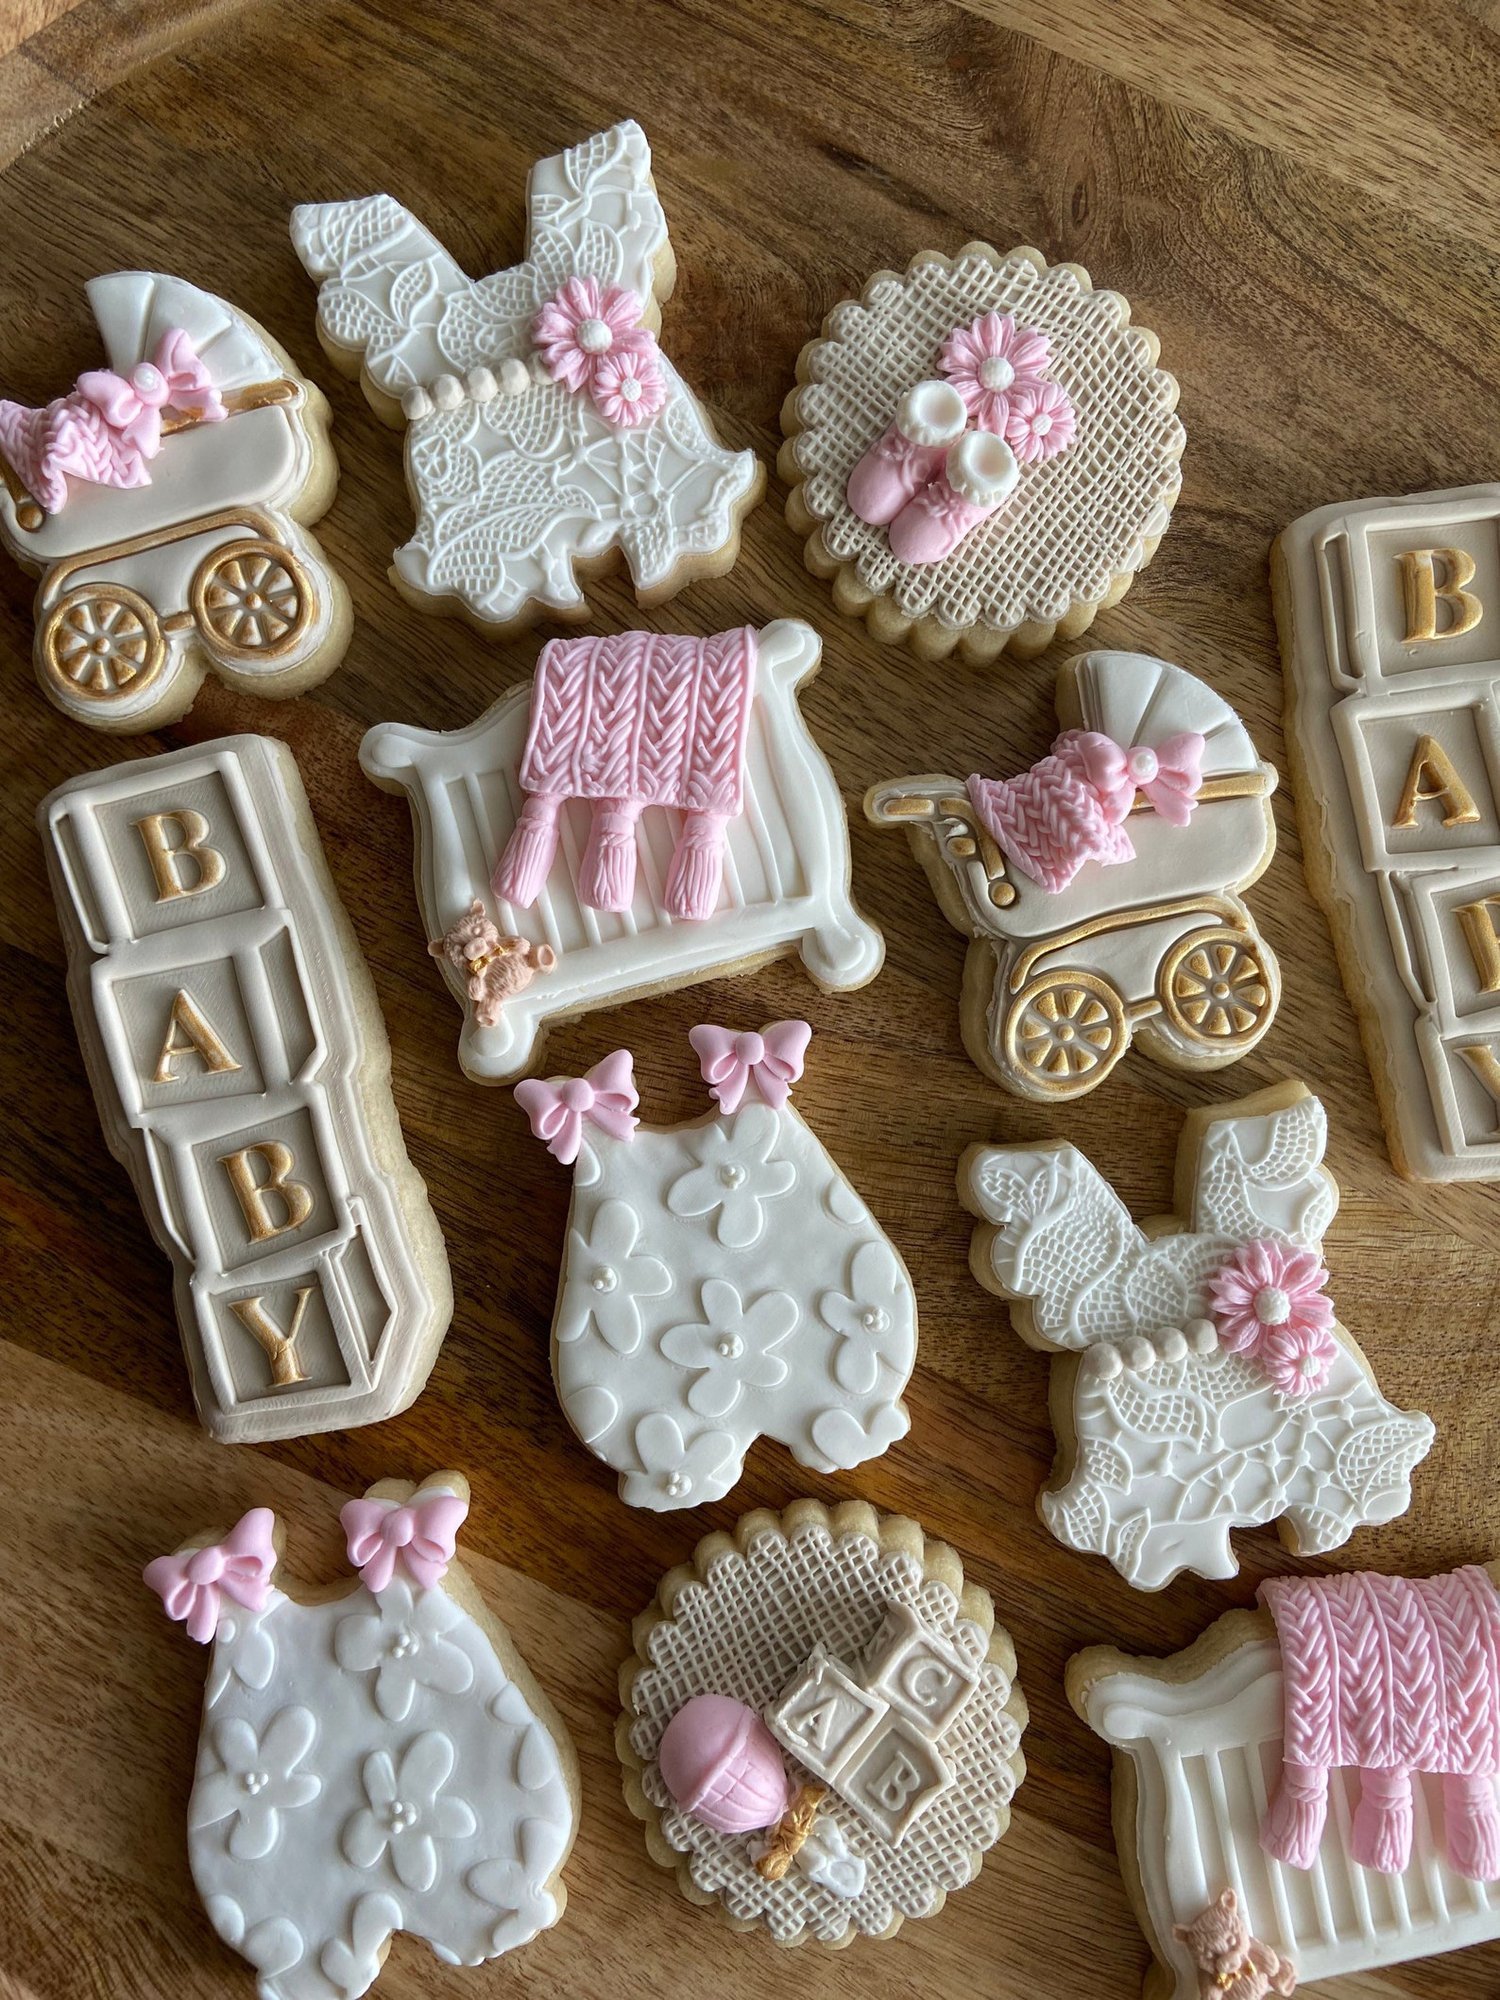 10 Cute Baby Shower Cookie Favor Ideas on Etsy